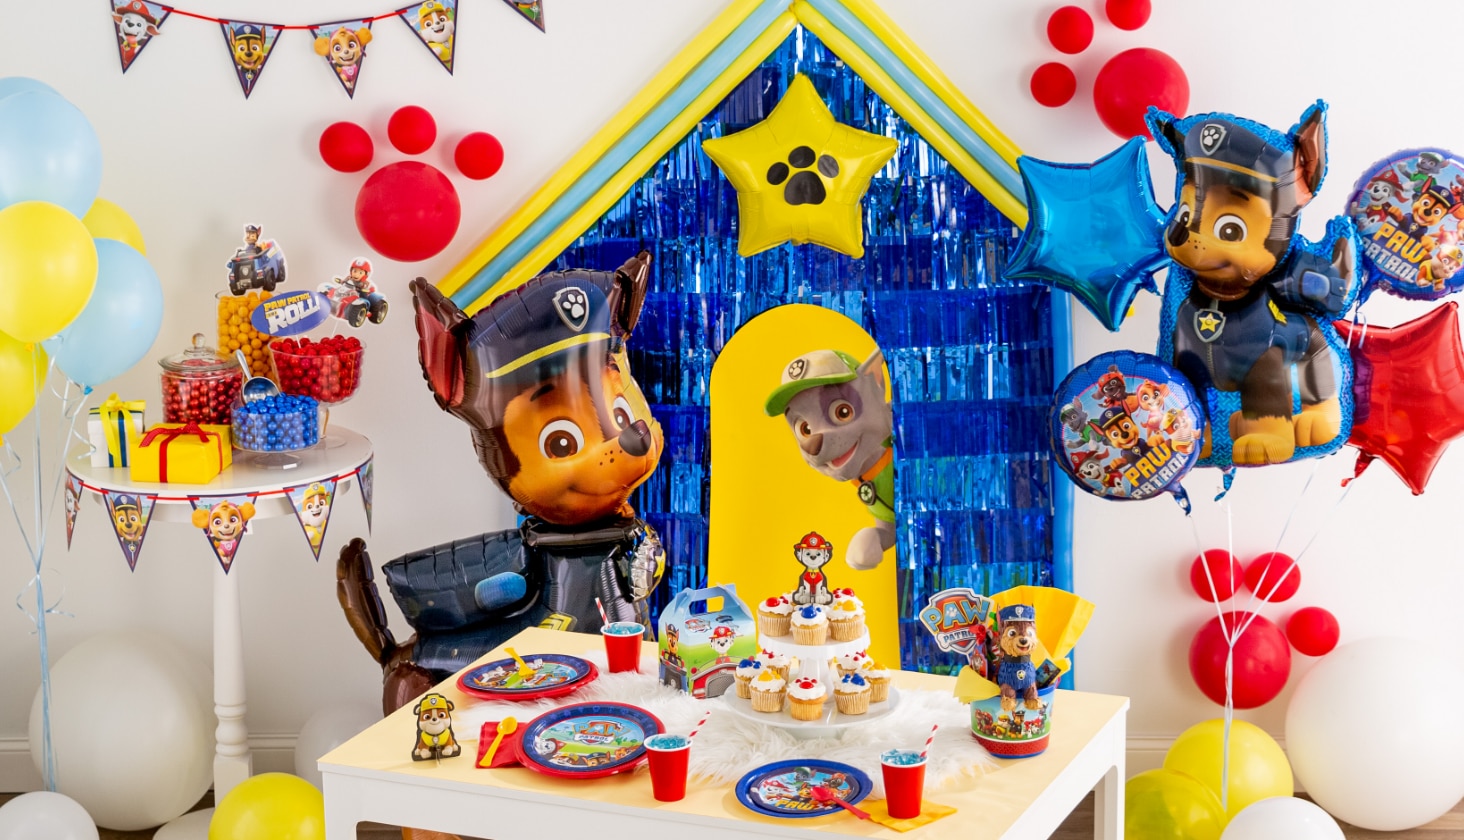 A room decorated with a PAW Patrol balloon bouquet and assorted PAW Patrol party supplies.